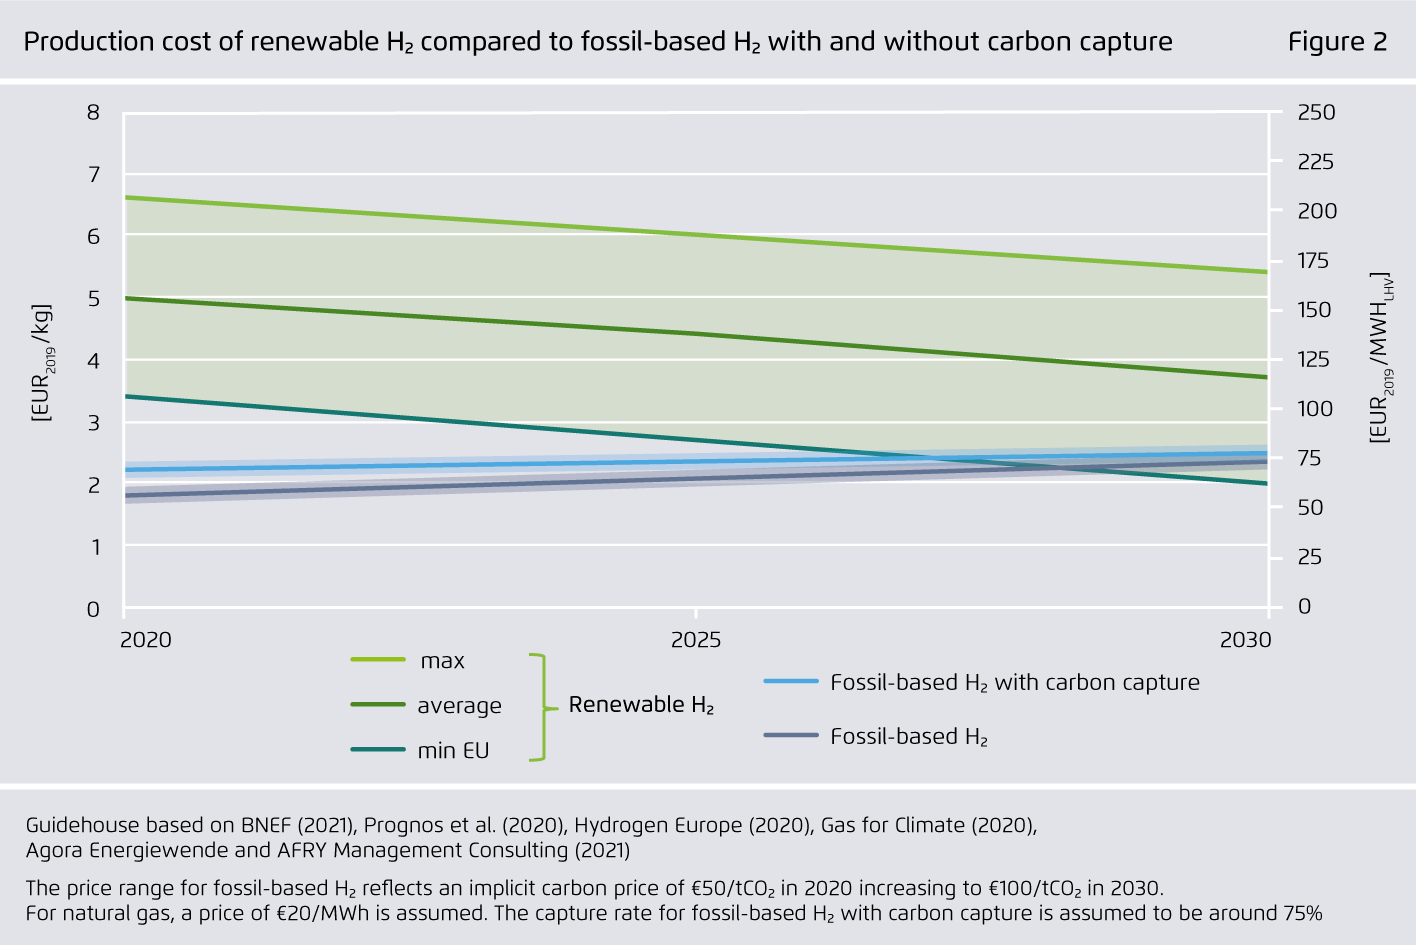 Preview for Production cost of renewable H₂ compared to fossil-based H₂ with carbon capture and natural gas